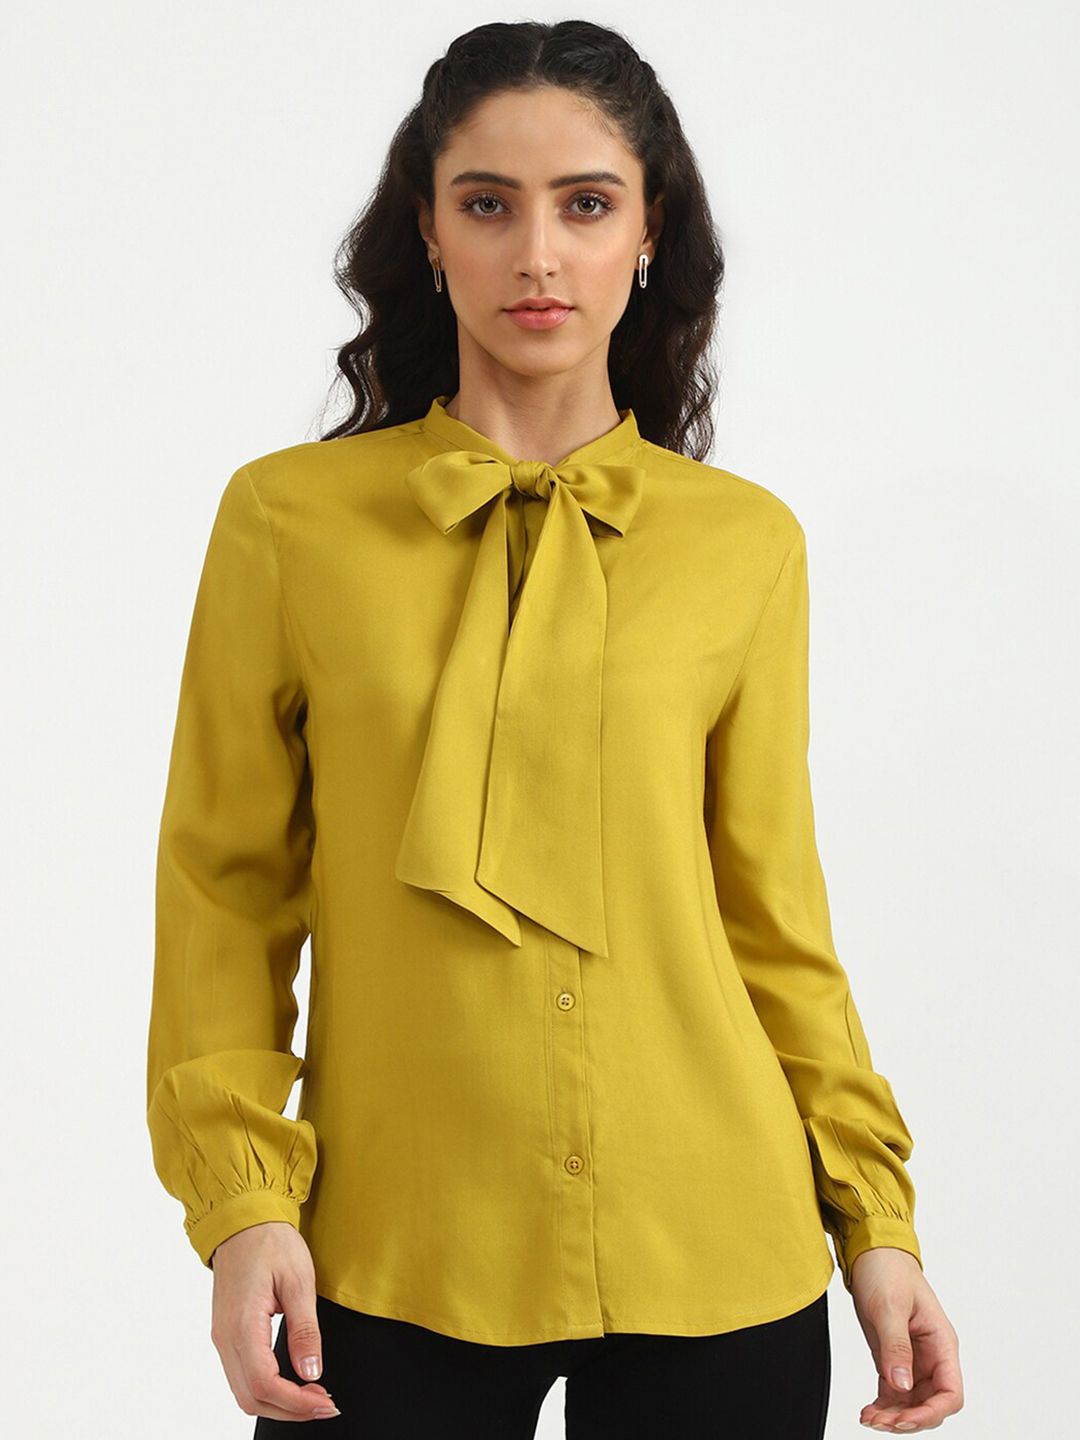 United Colors of Benetton Mustard Yellow Solid Tie-Up Neck Top Price in India